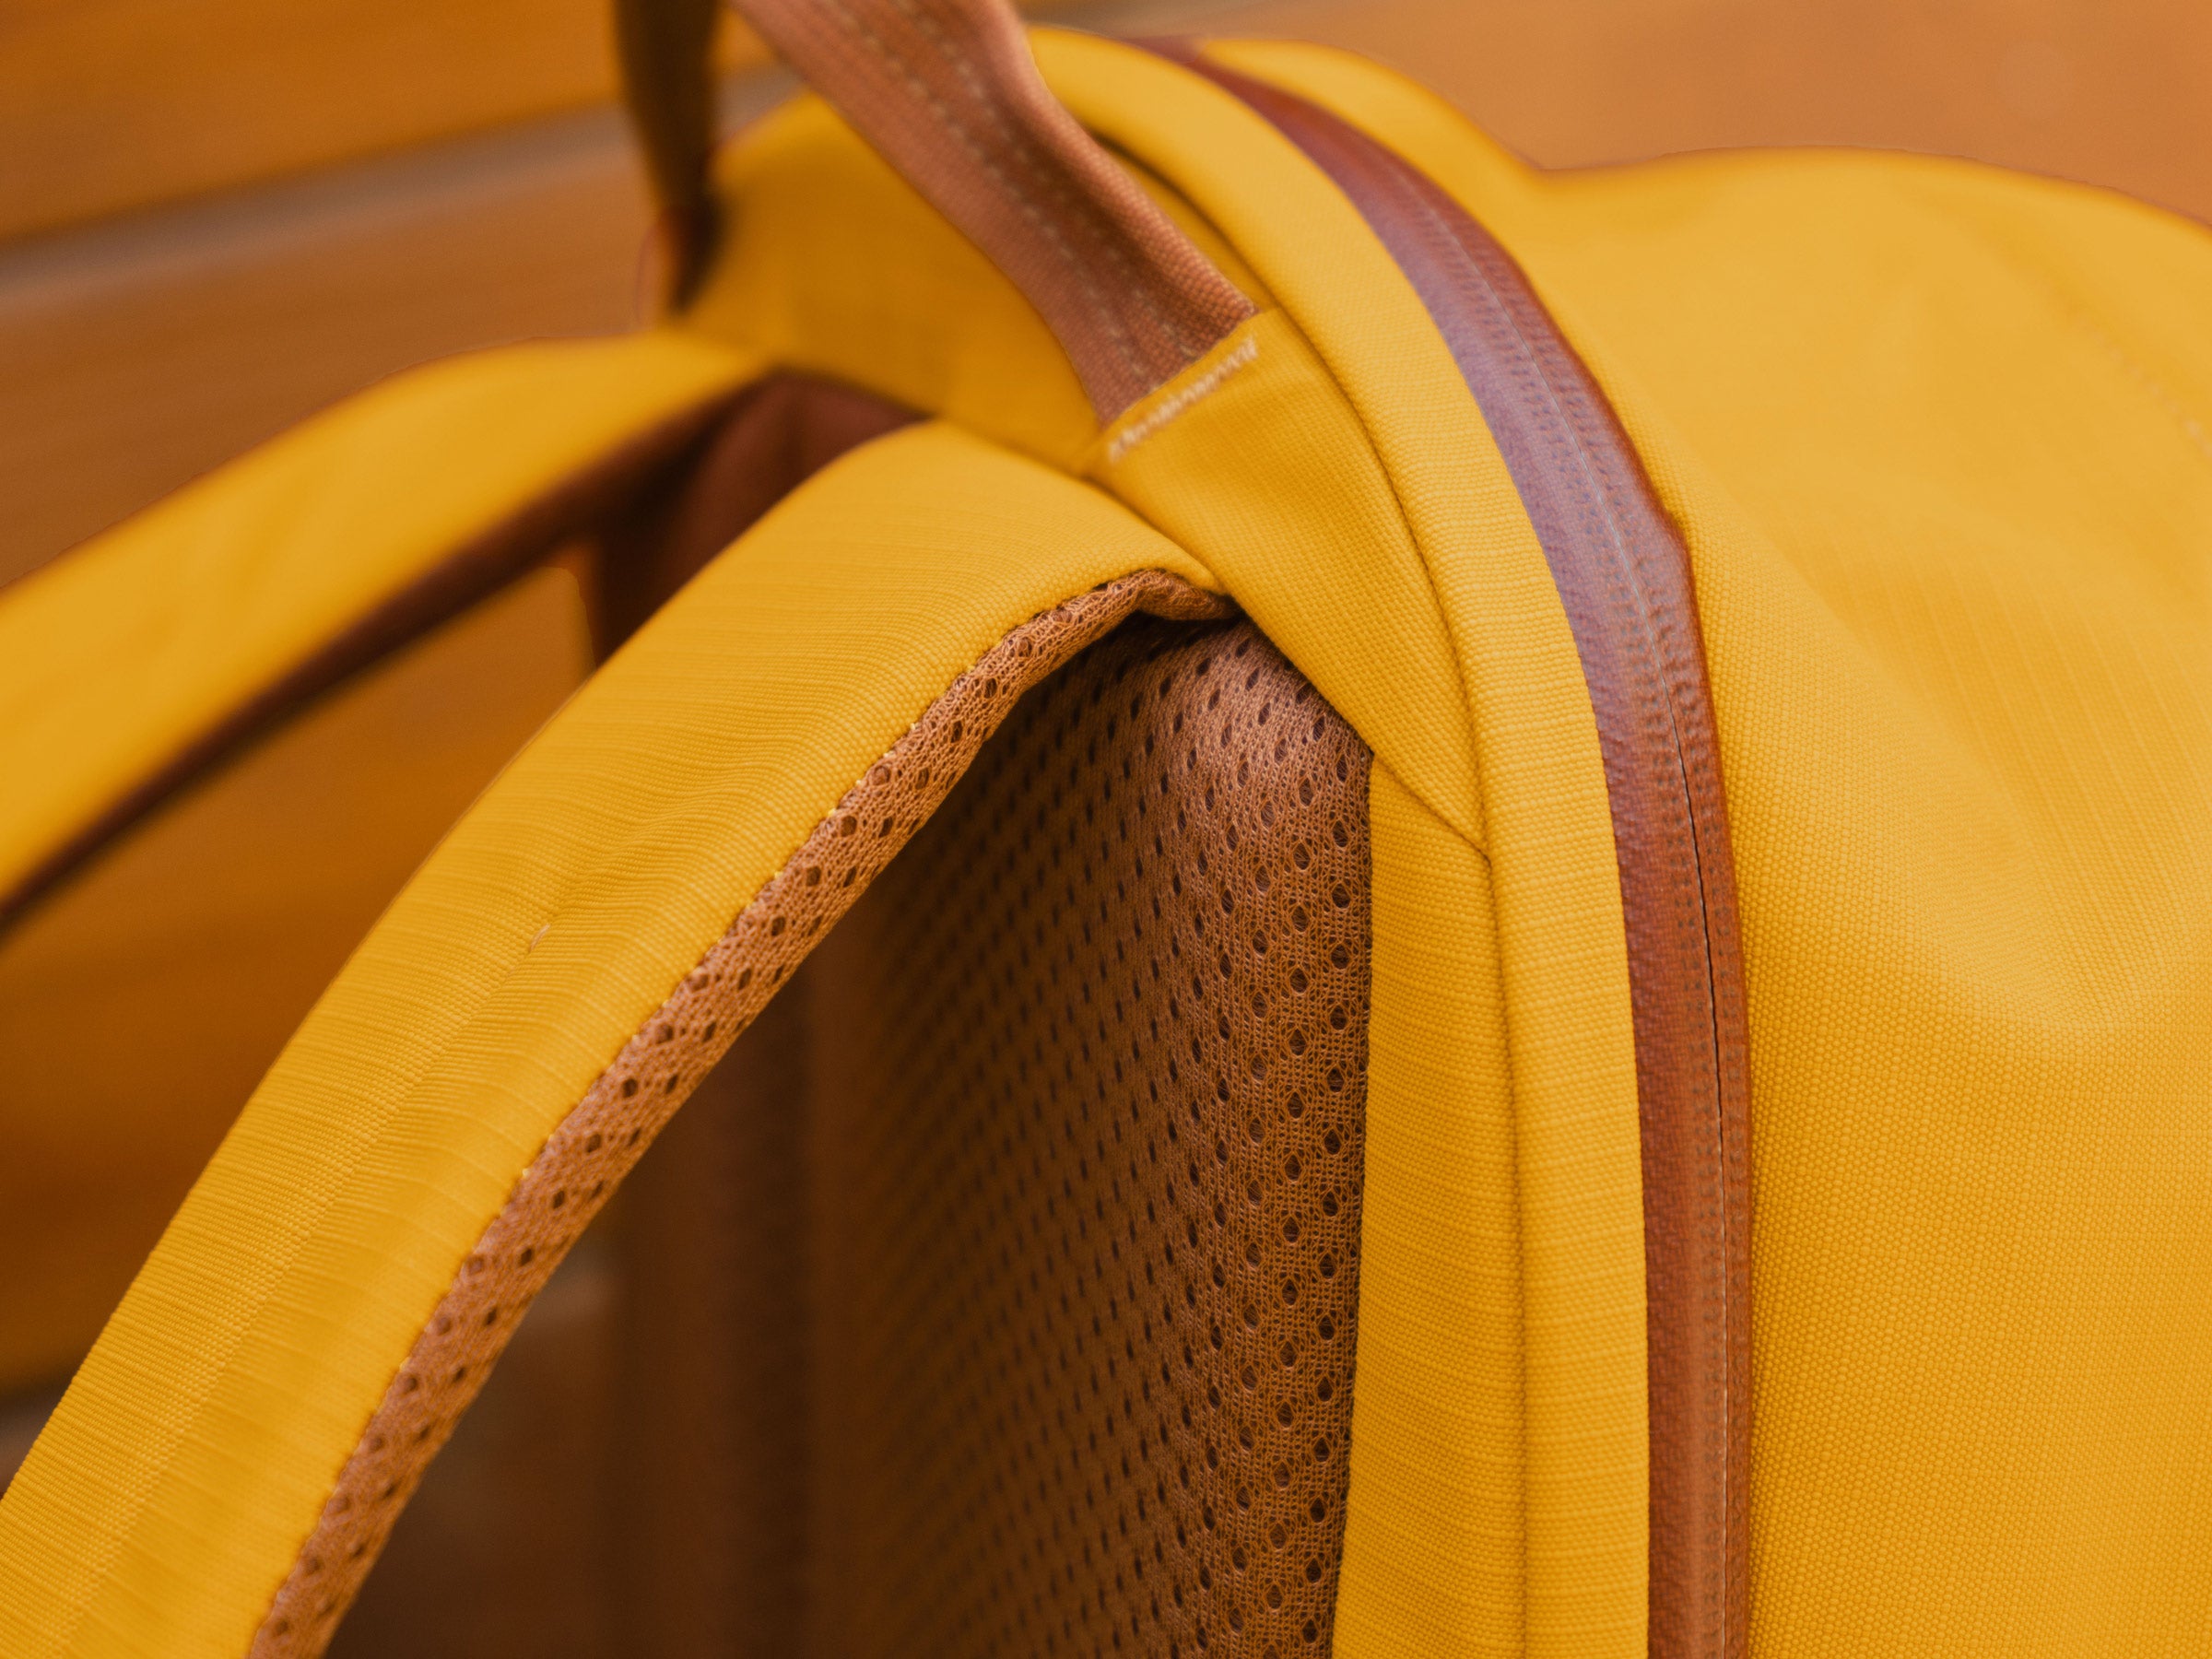 A detail of the Moment Everything backpack's padding and zipper